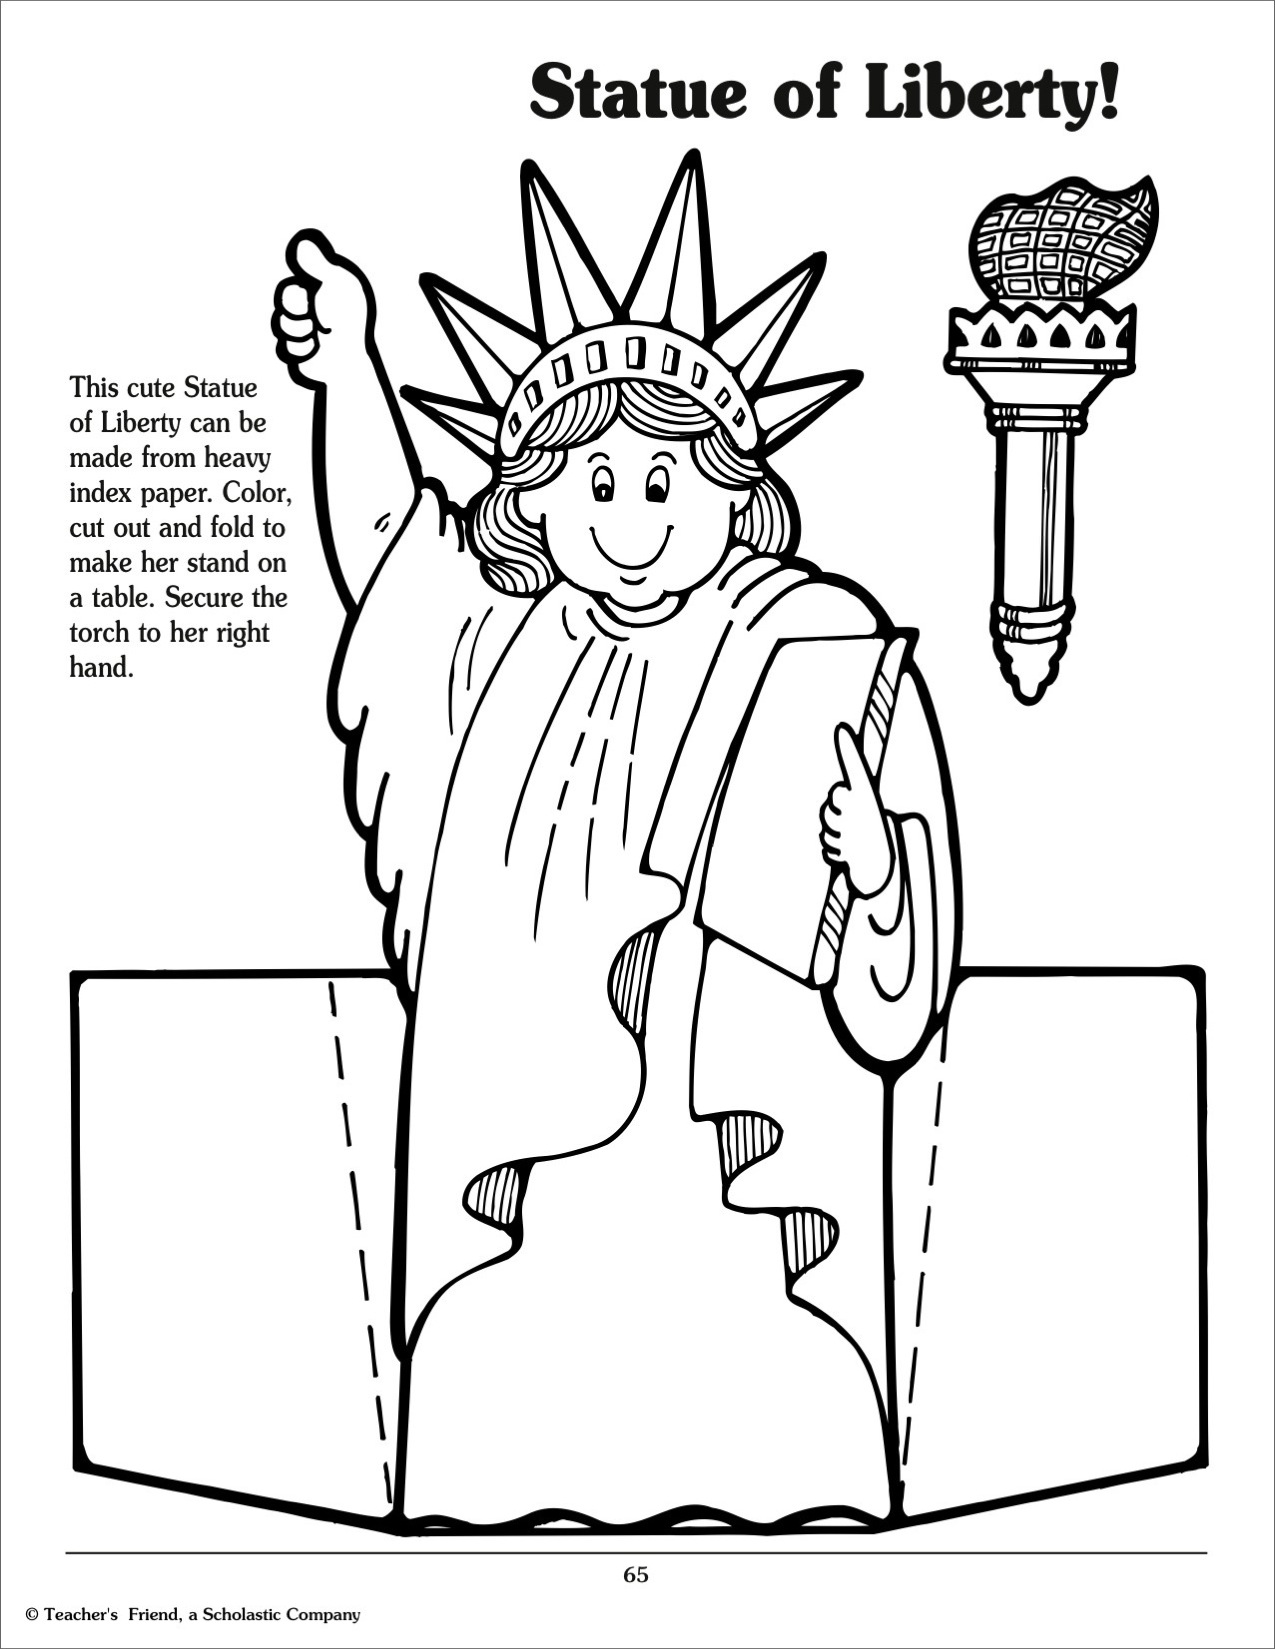 statue-of-liberty-torch-drawing-at-getdrawings-free-download